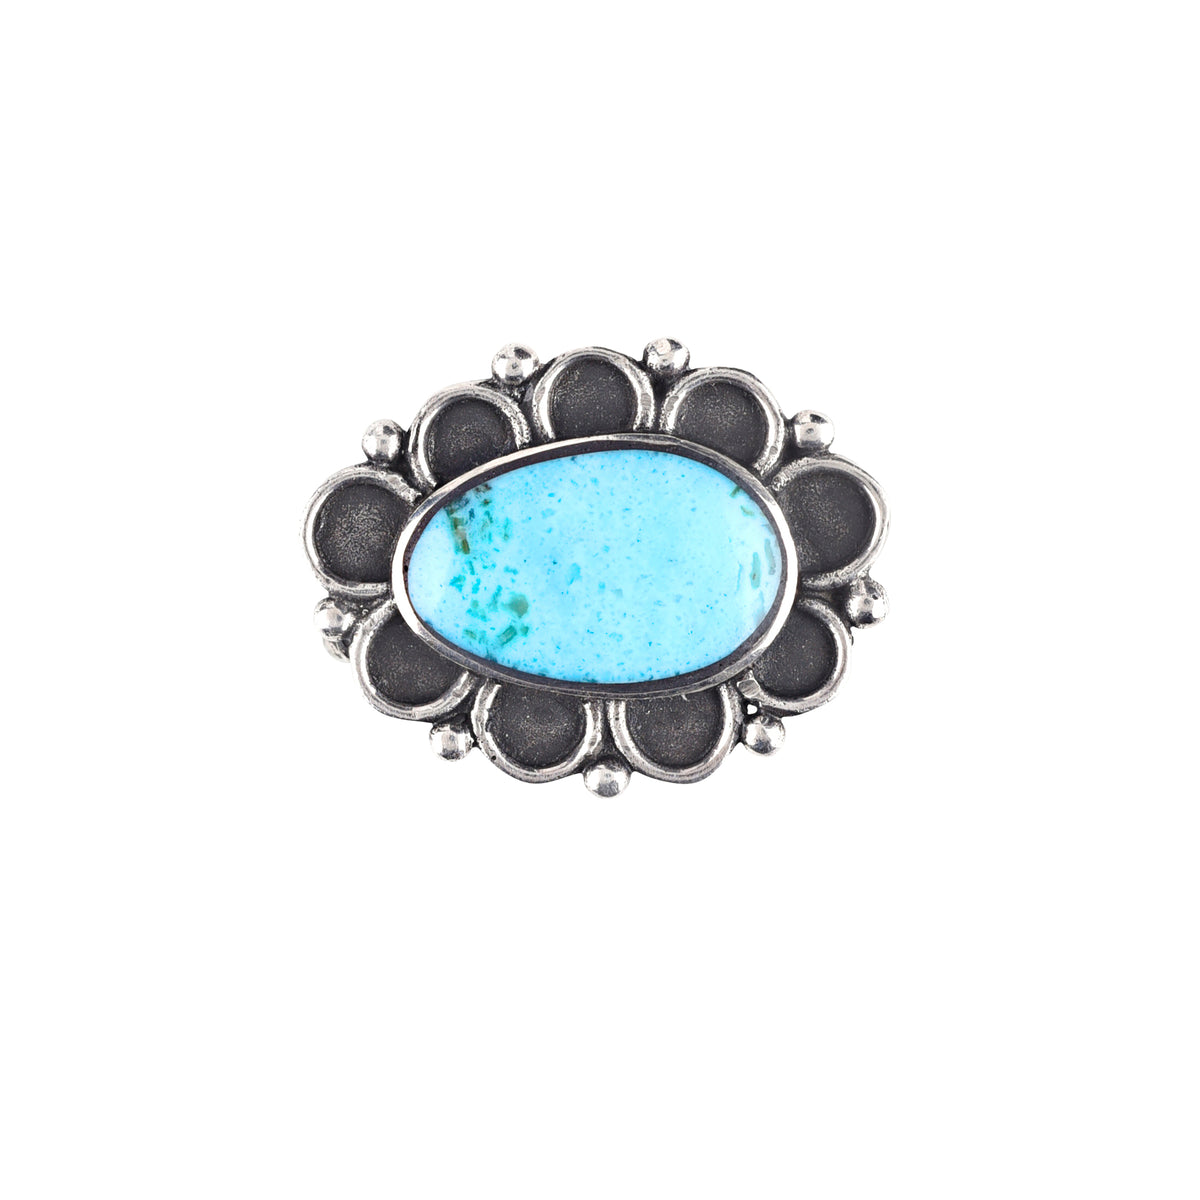 Sterling Silver and Turquoise Oxidized Pin | COWGIRL Heirloom by Peyote Bird